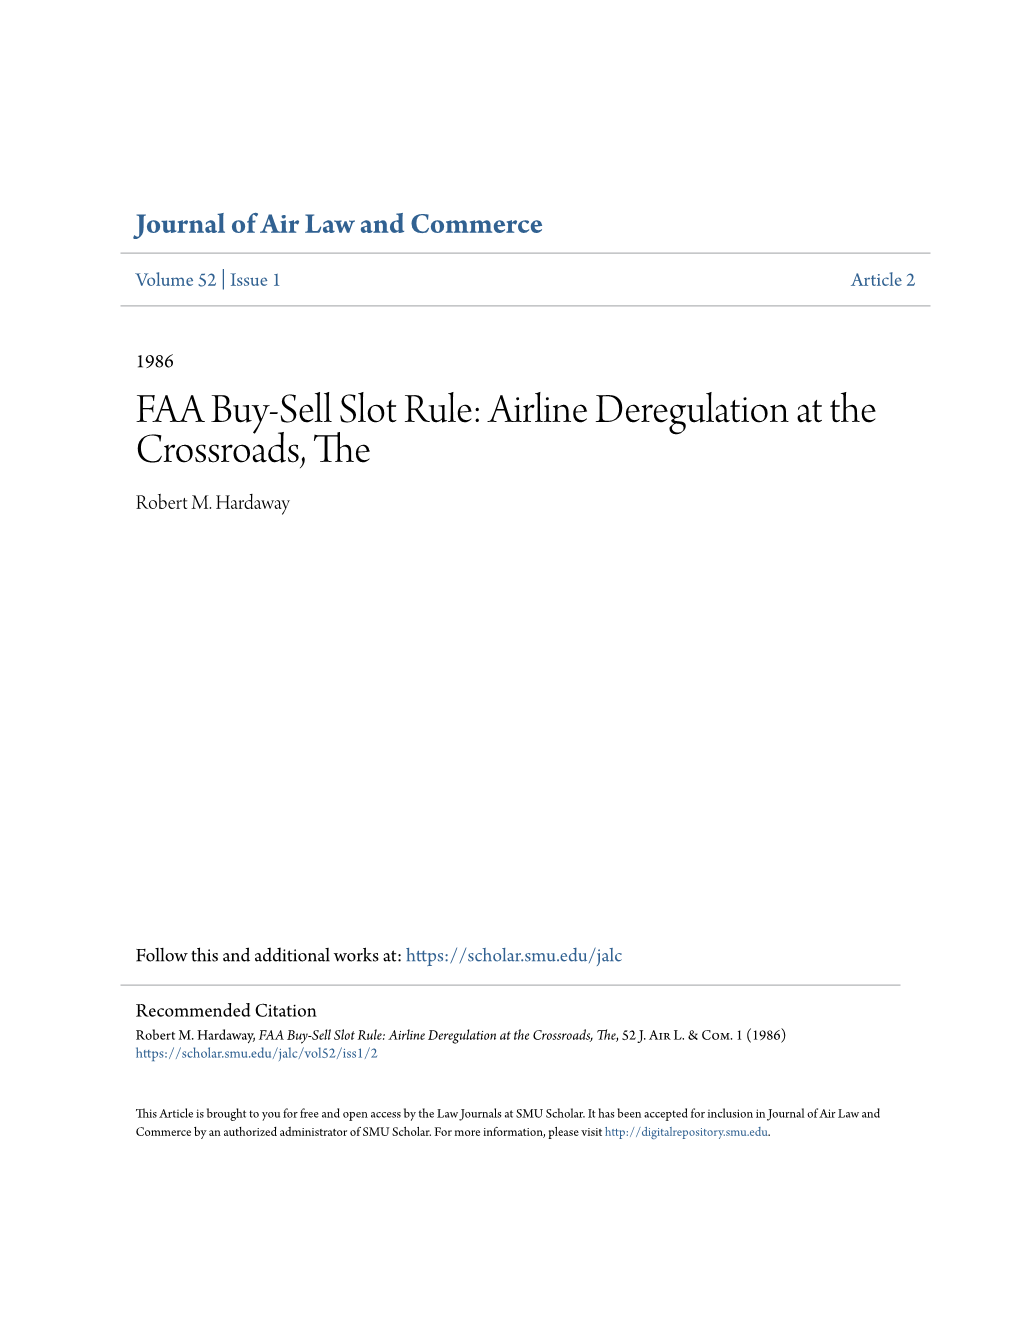 FAA Buy-Sell Slot Rule: Airline Deregulation at the Crossroads, the Robert M